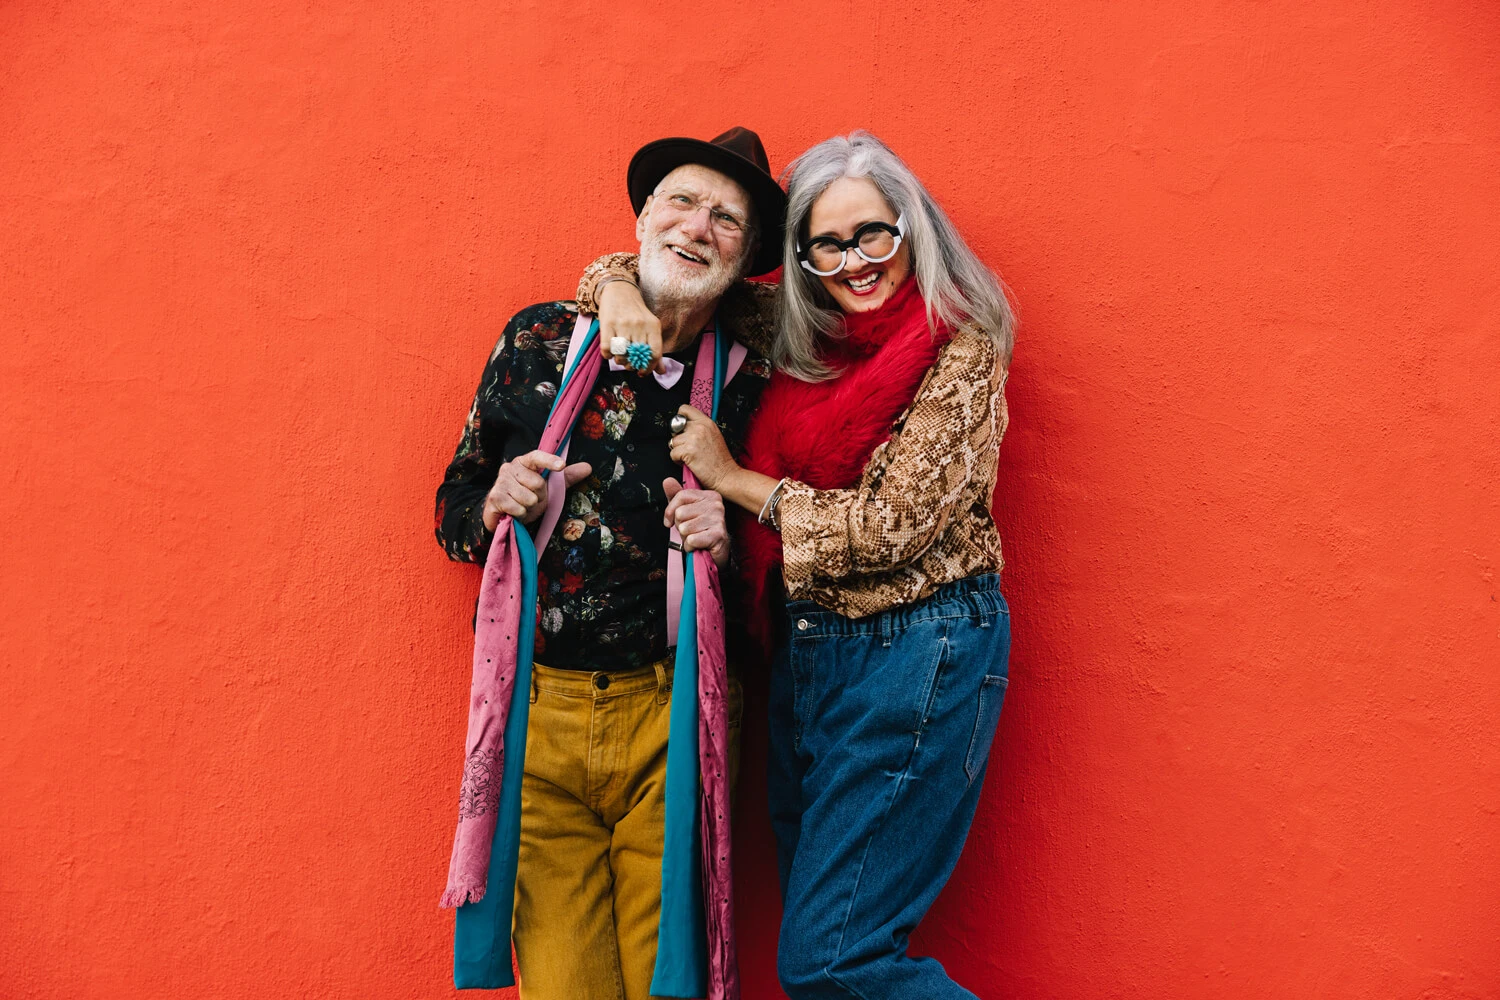 Two mature people against an orange wall